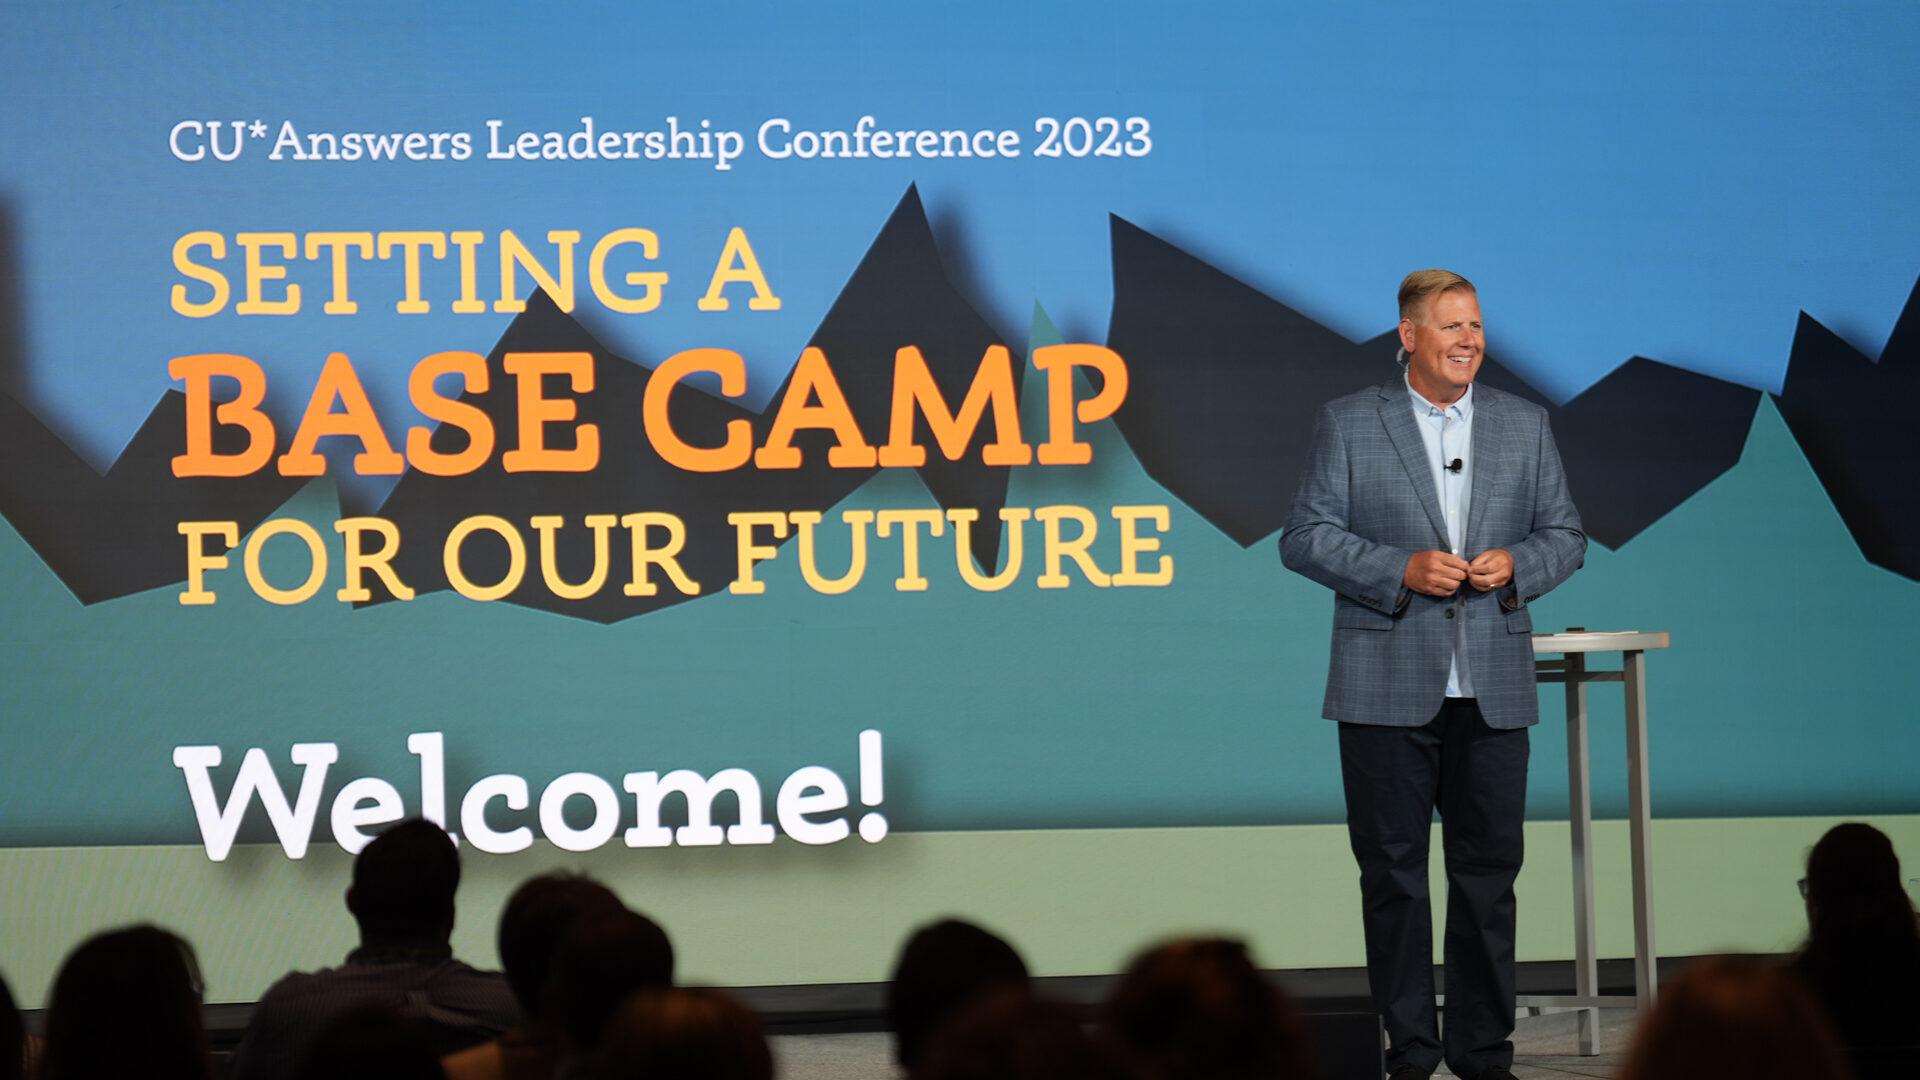 CU*Answers CEO Geoff Johnson welcomes attendees to the 2023 Leadership Conference.